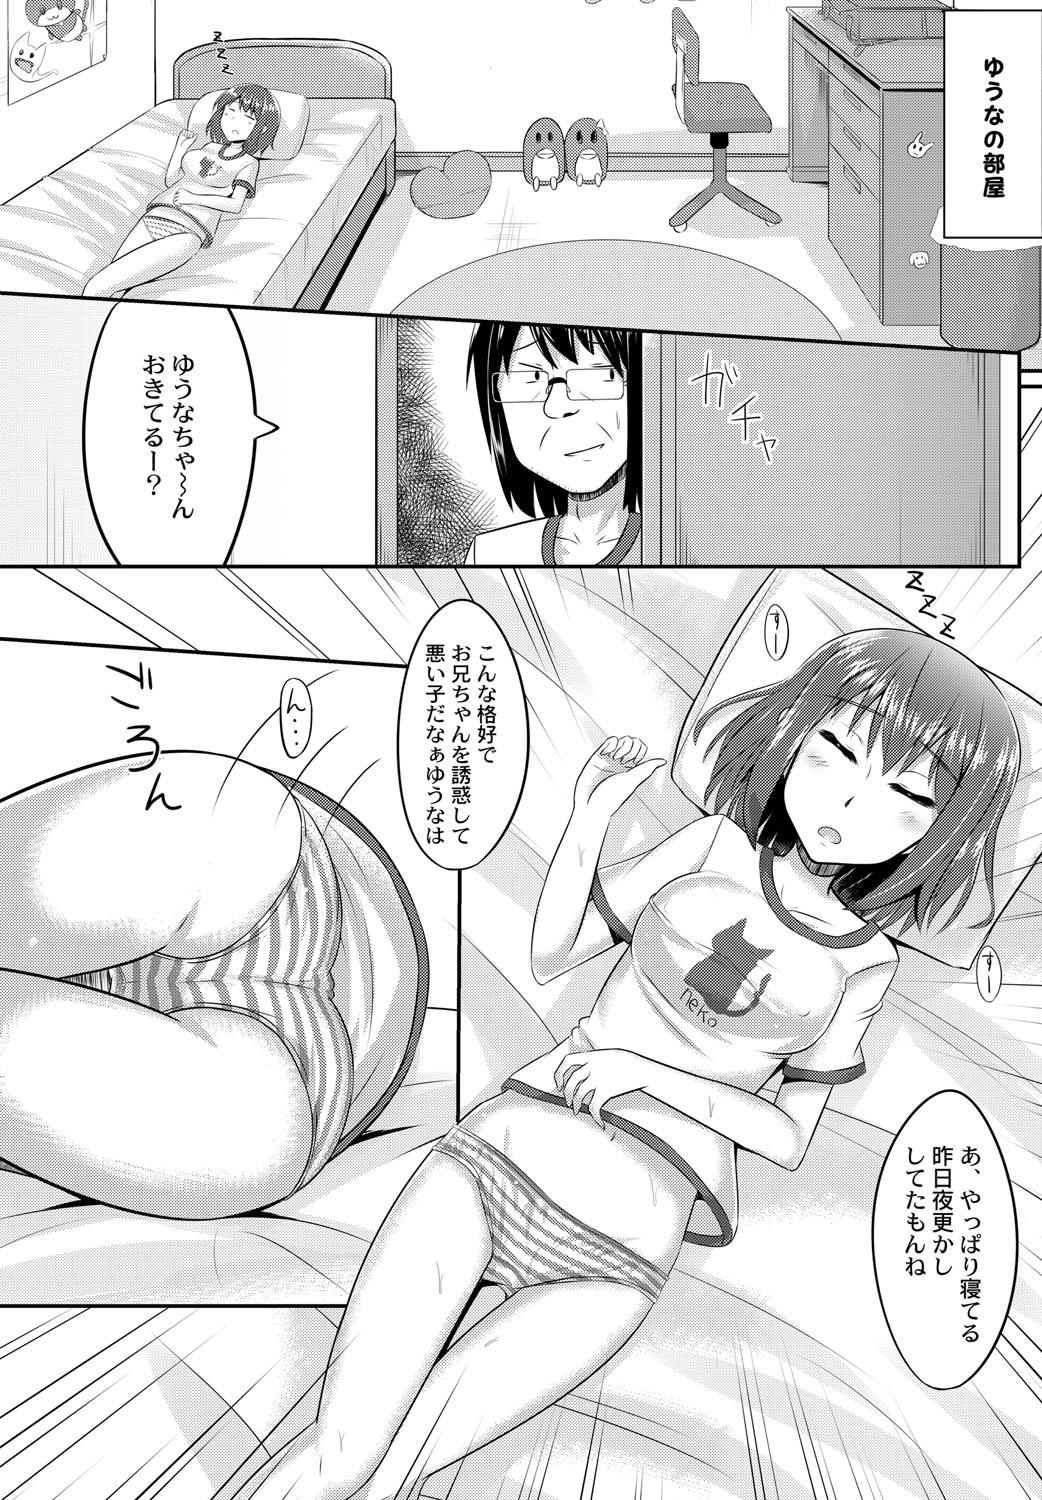 Cute Sister Temptation Anime - Page 5